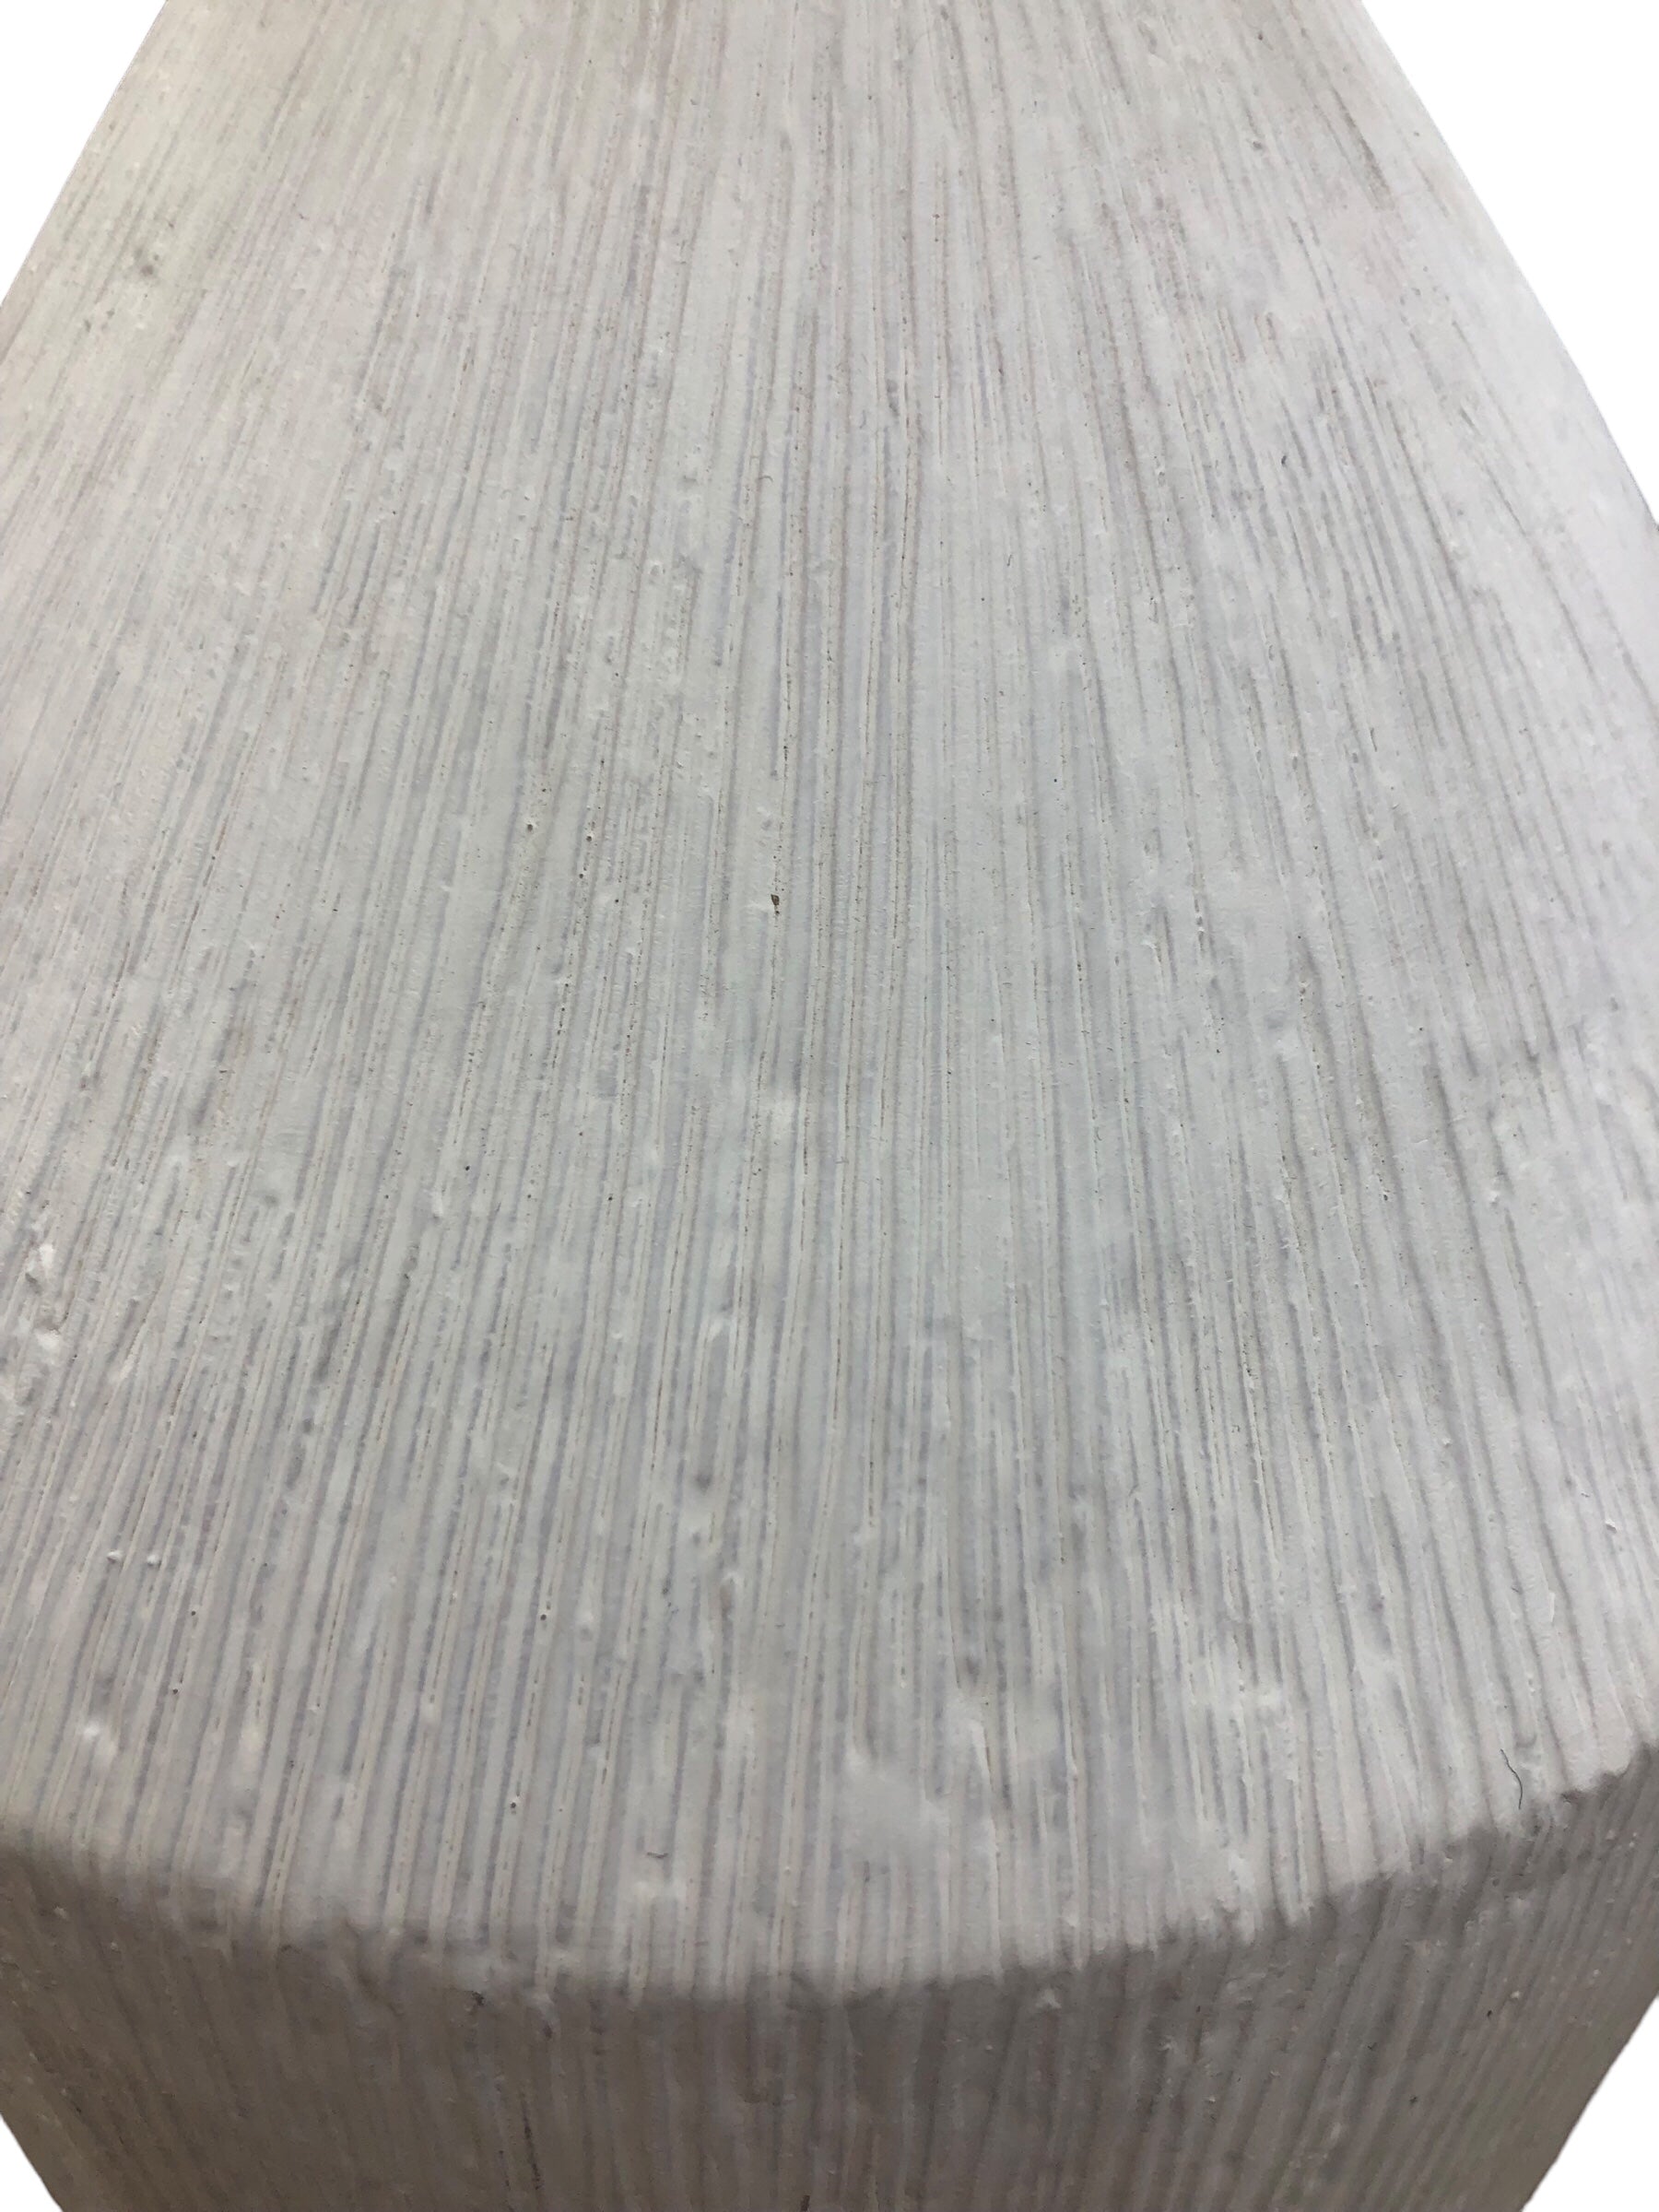 Tall White Vase with Texture